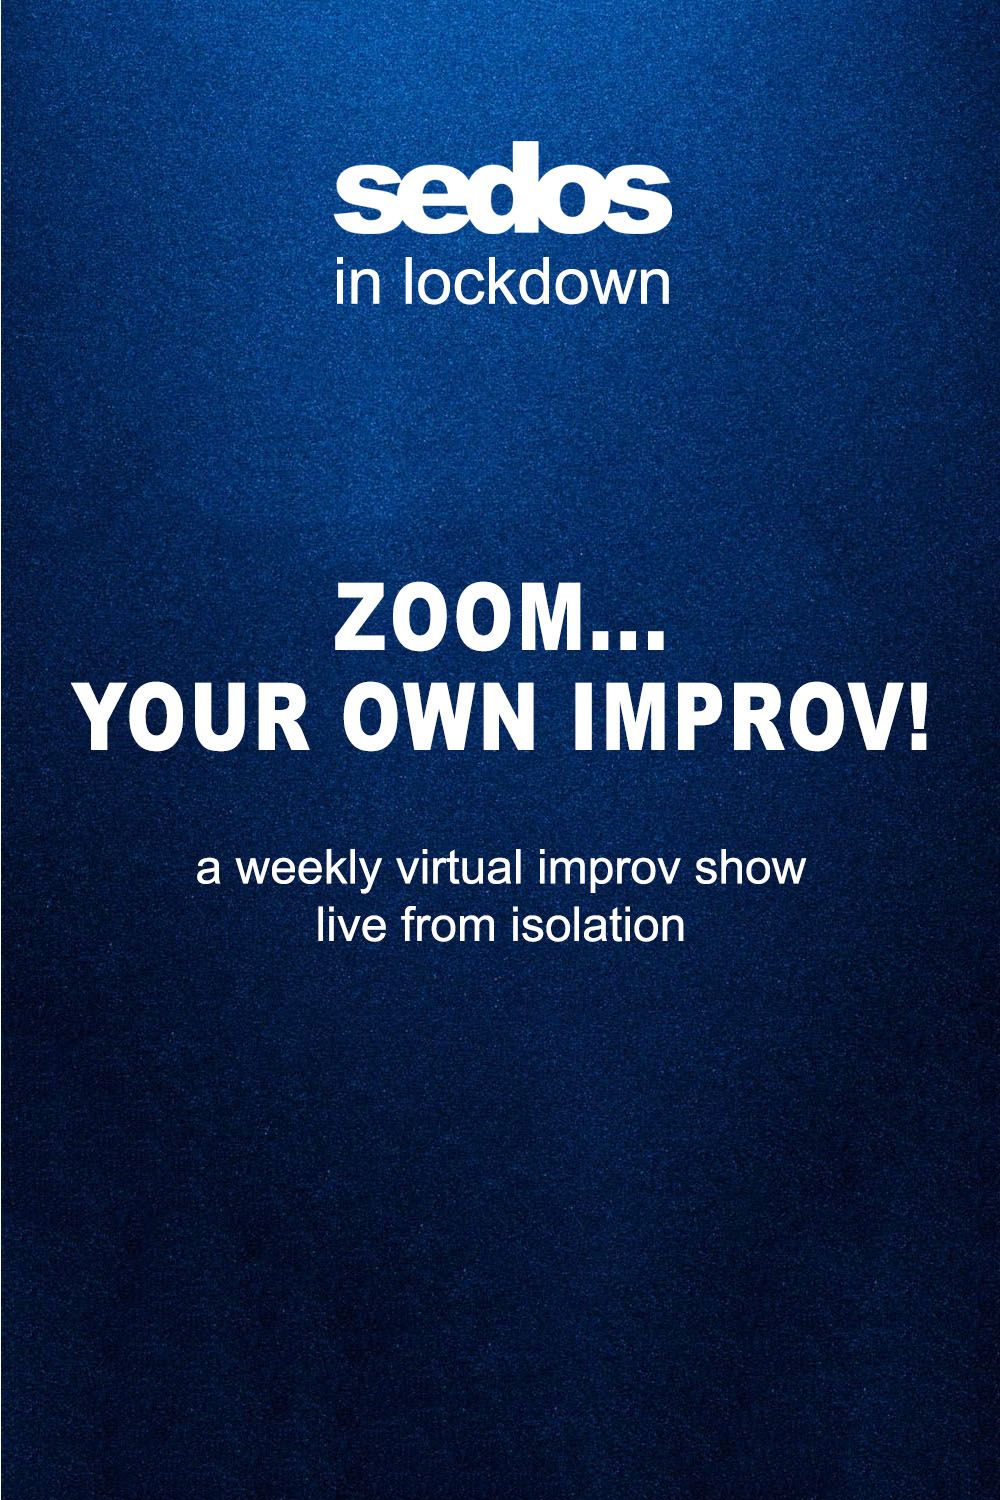 Zoom... Your Own Improv! flyer image